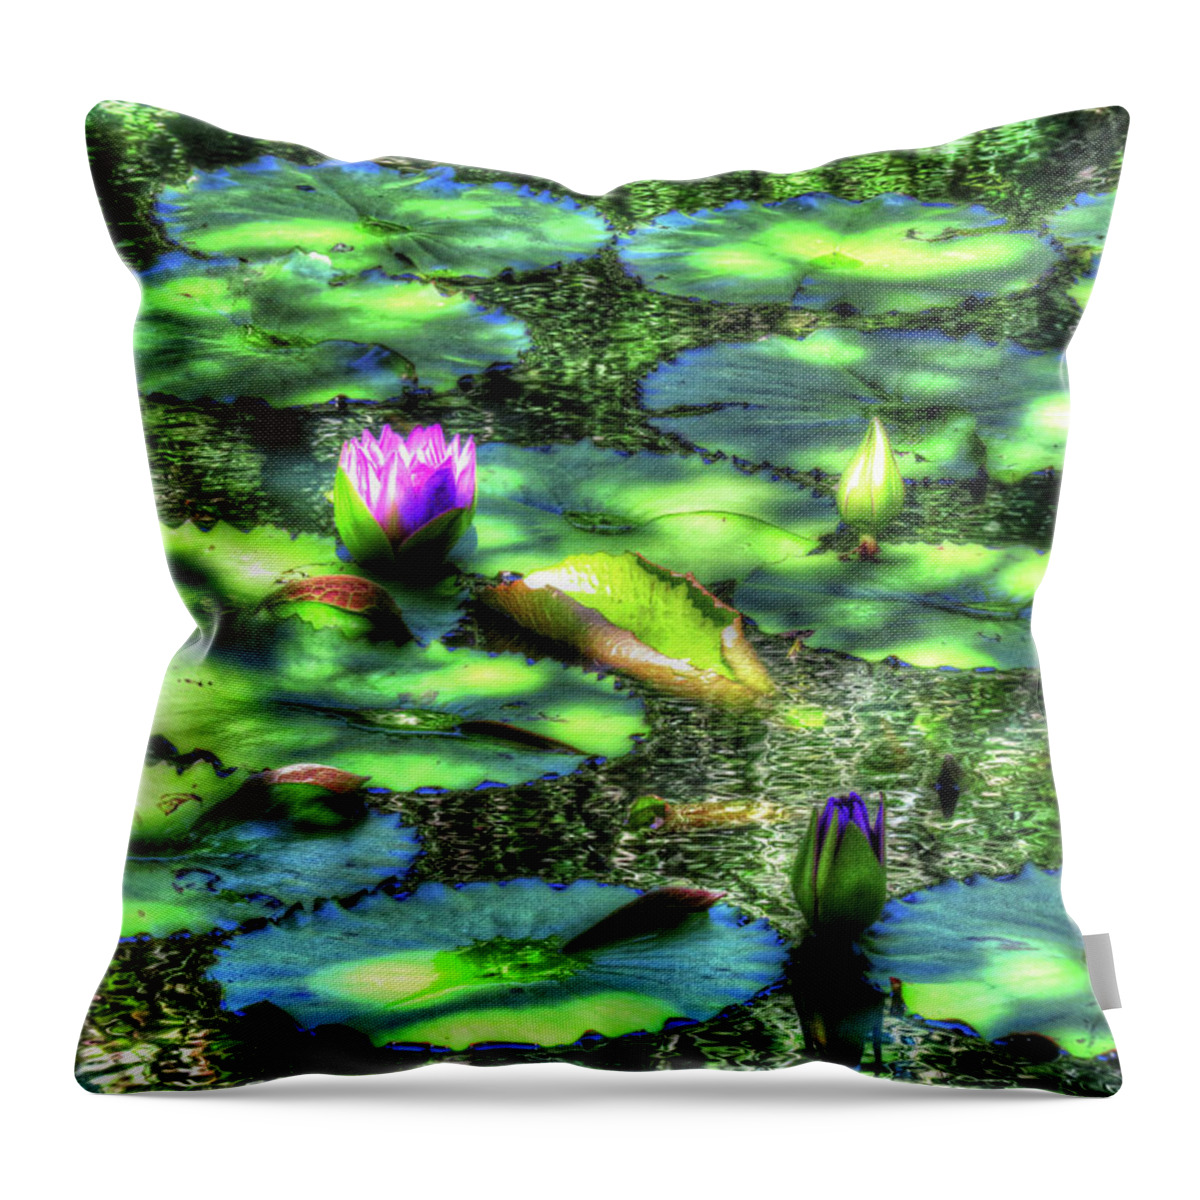 Water Lily Throw Pillow featuring the digital art Lone Lily by Kathleen Illes